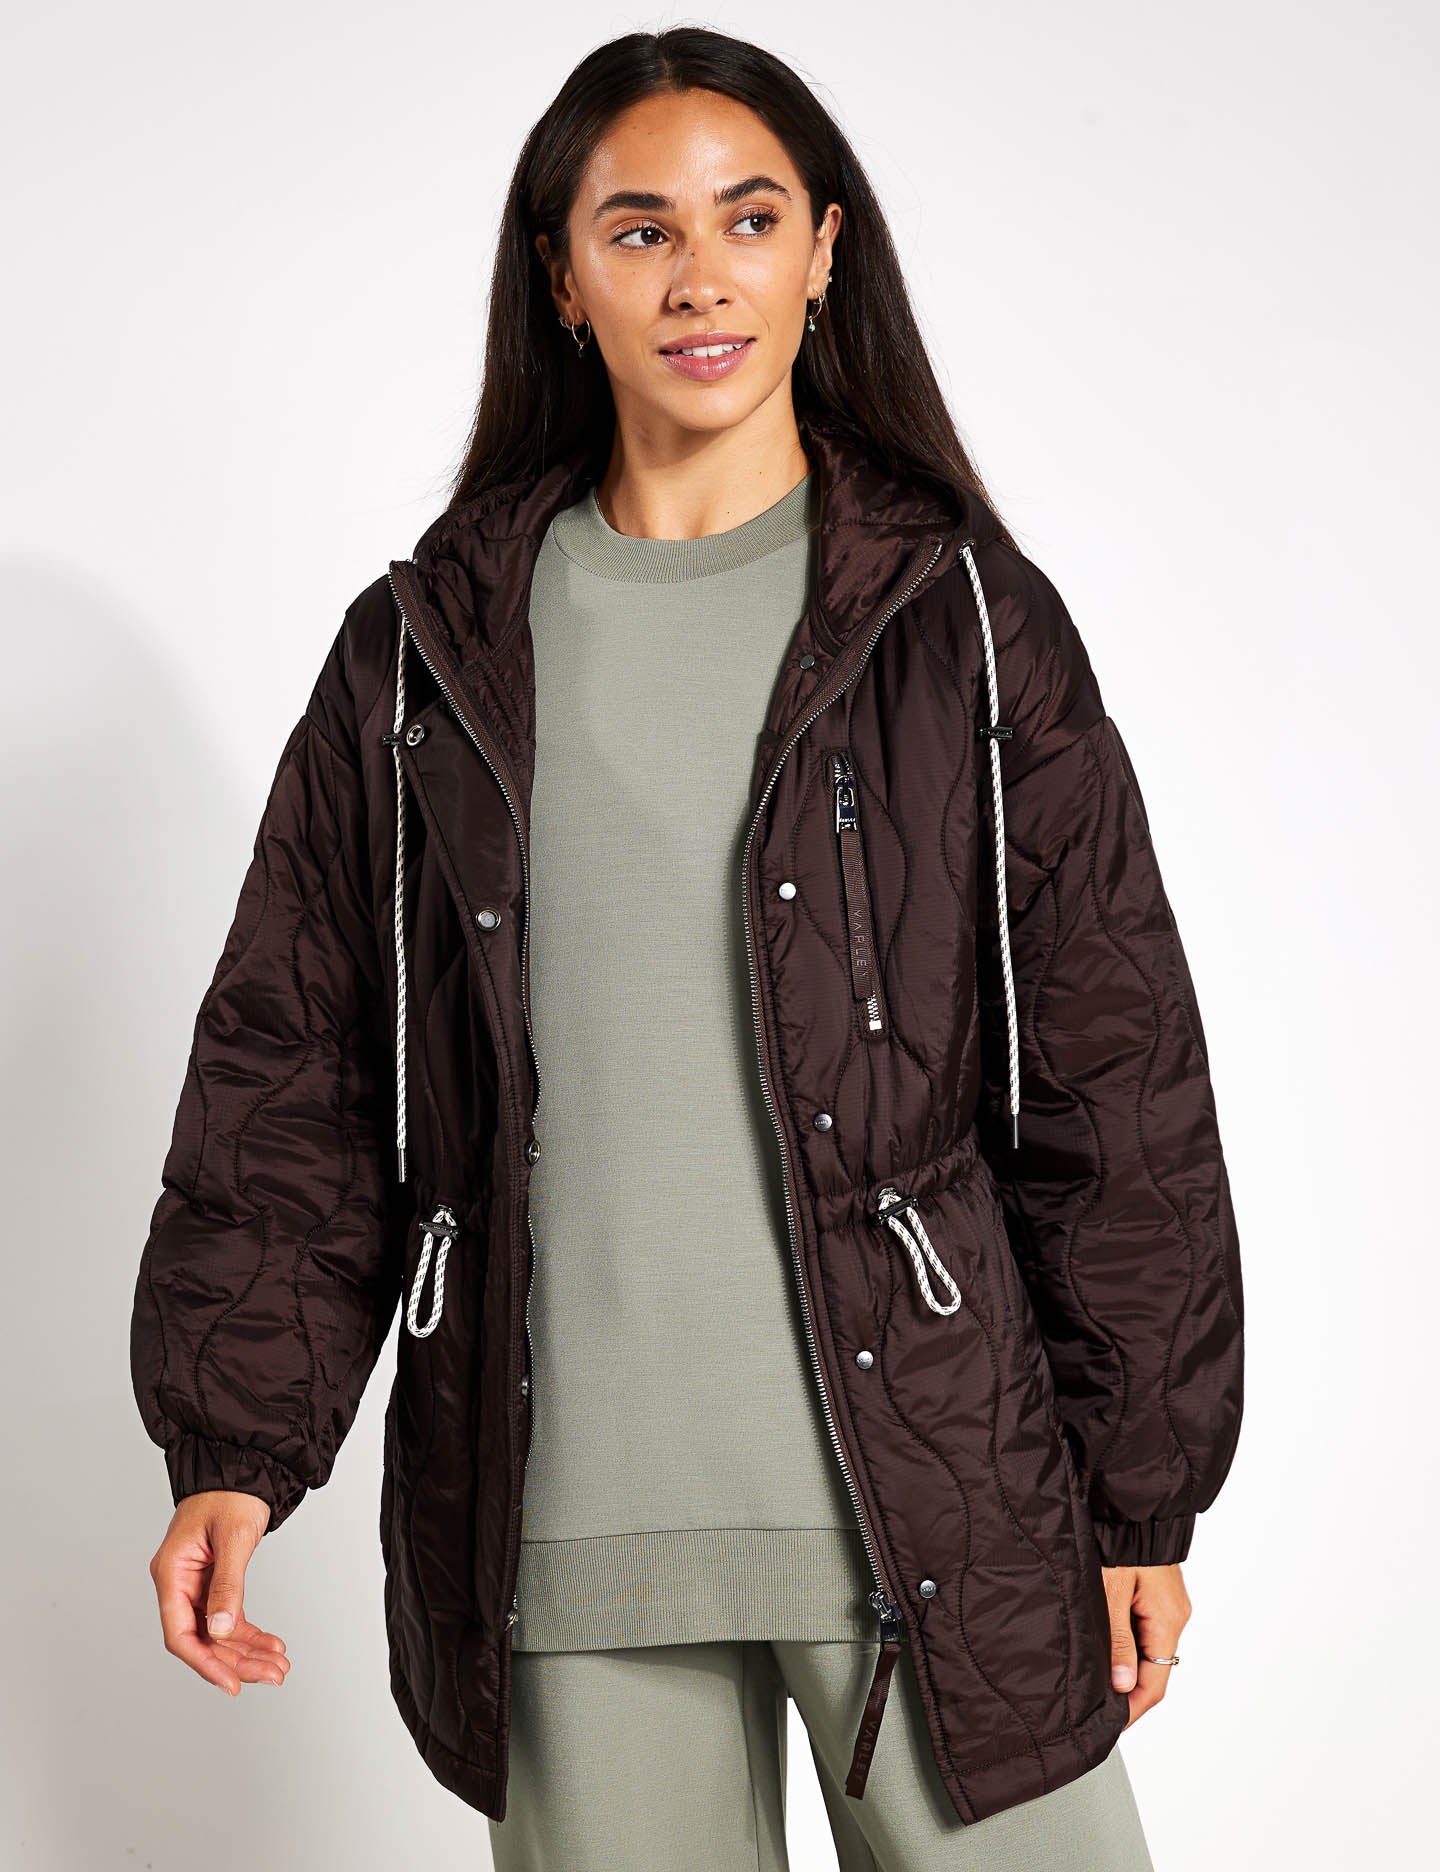 New Arrivals, Women's Activewear & Outerwear, Varley US